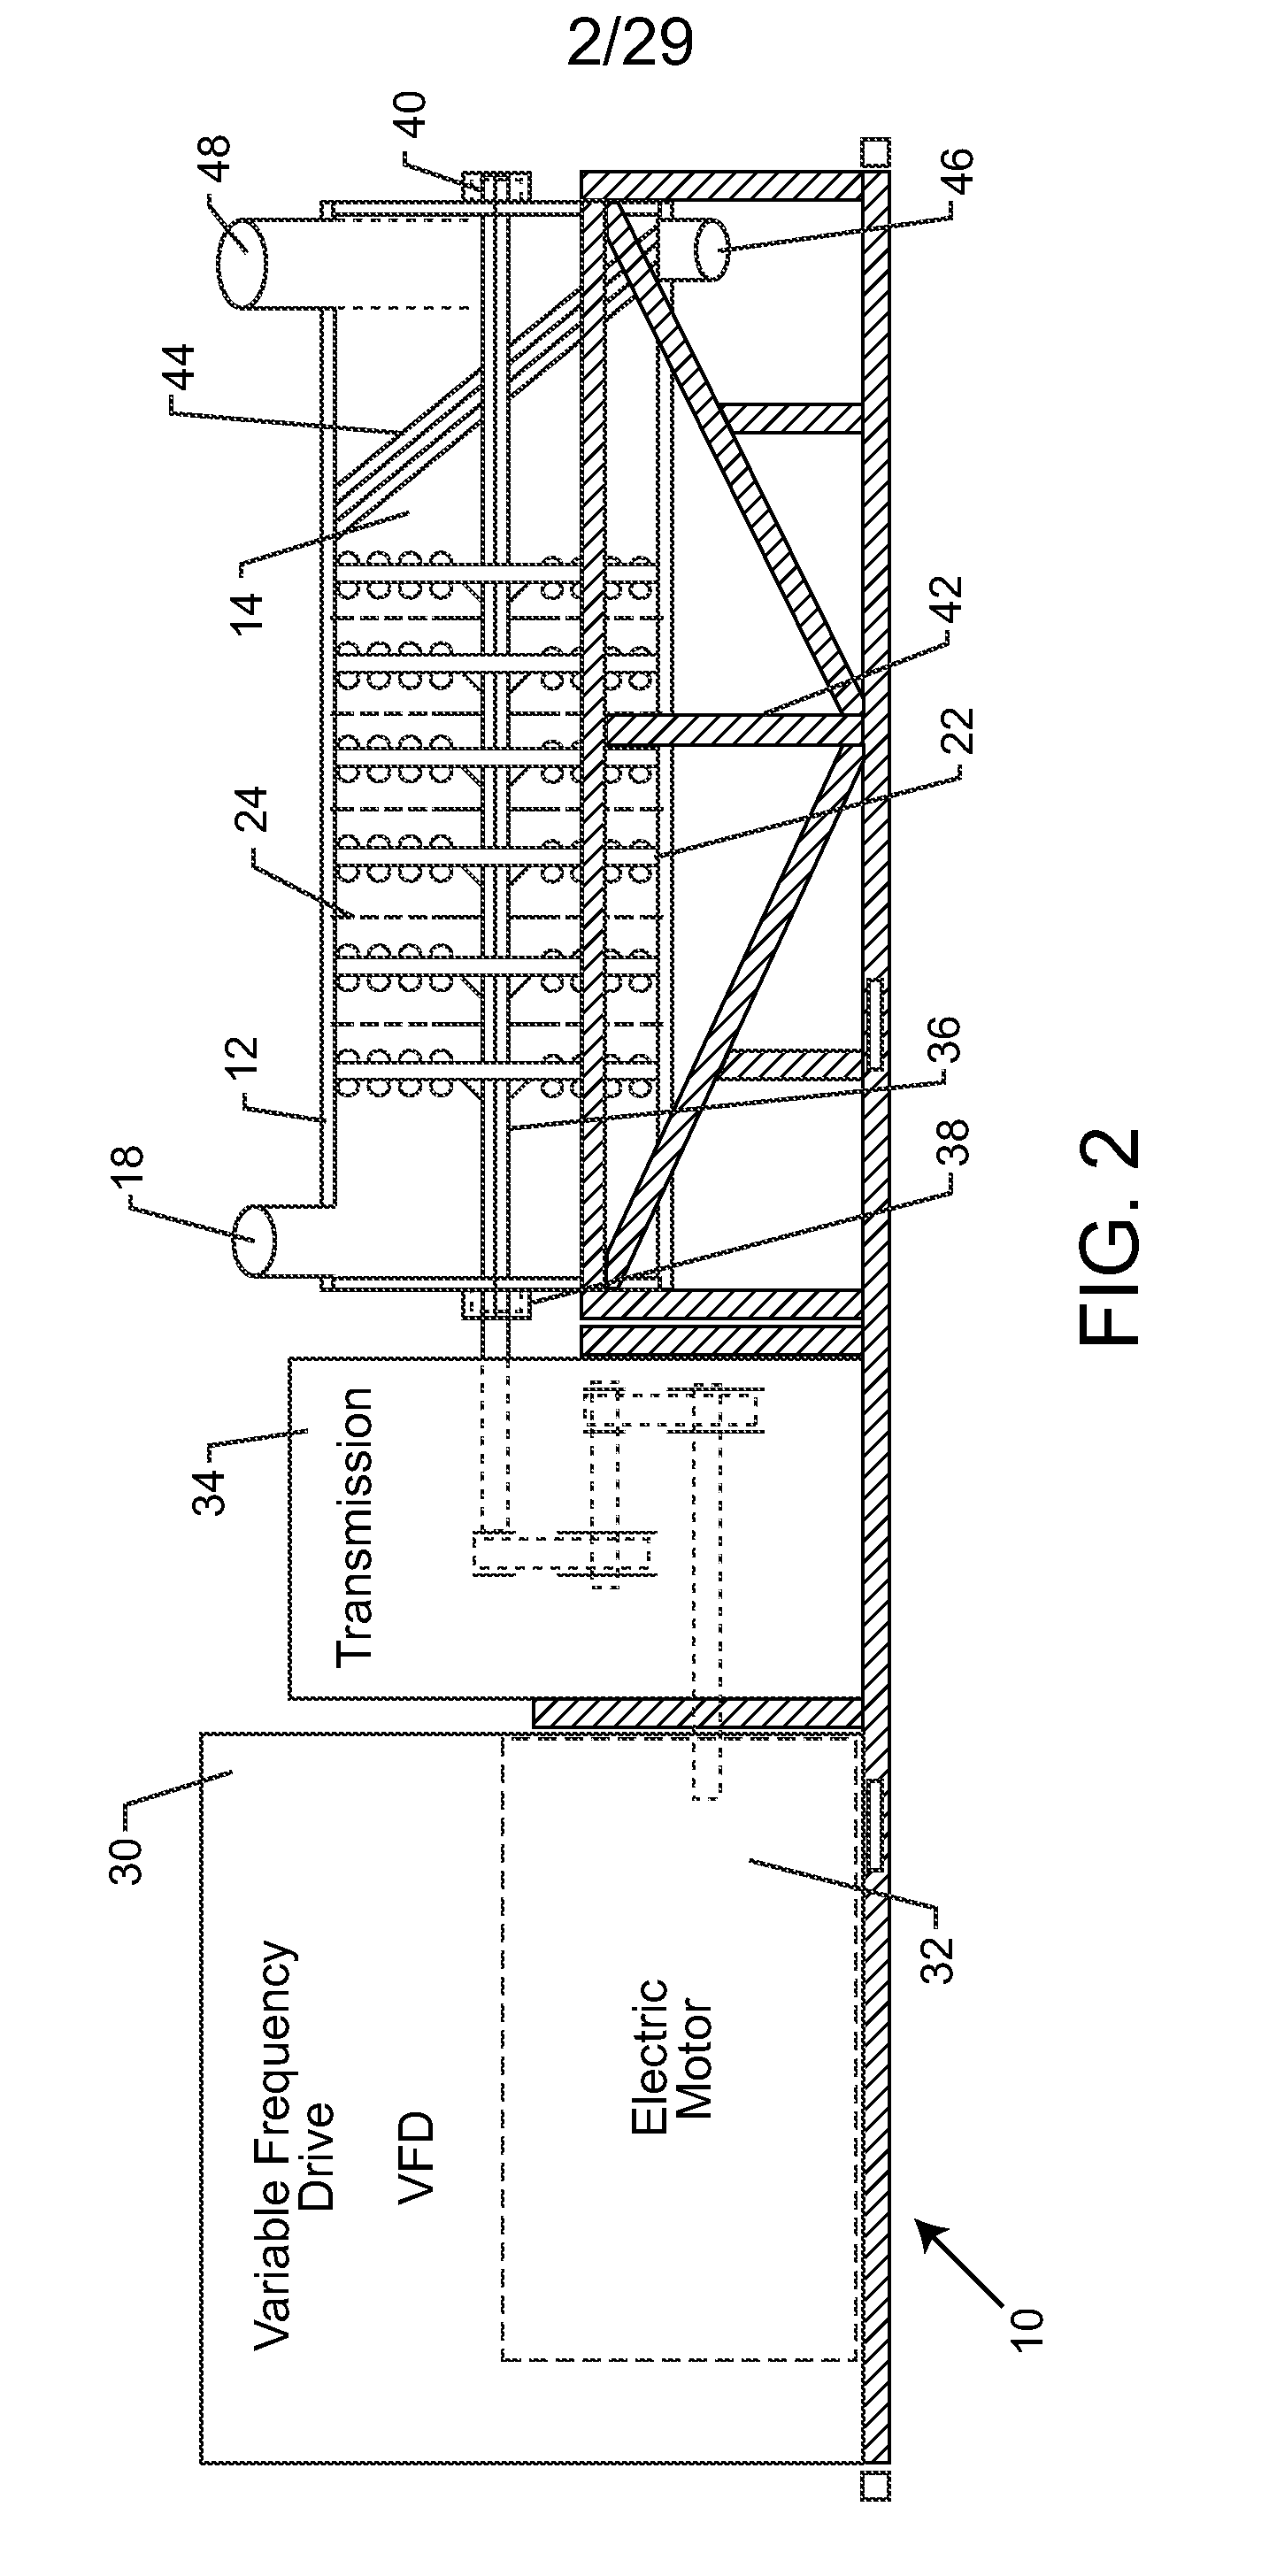 System for processing water and generating water vapor for other processing uses